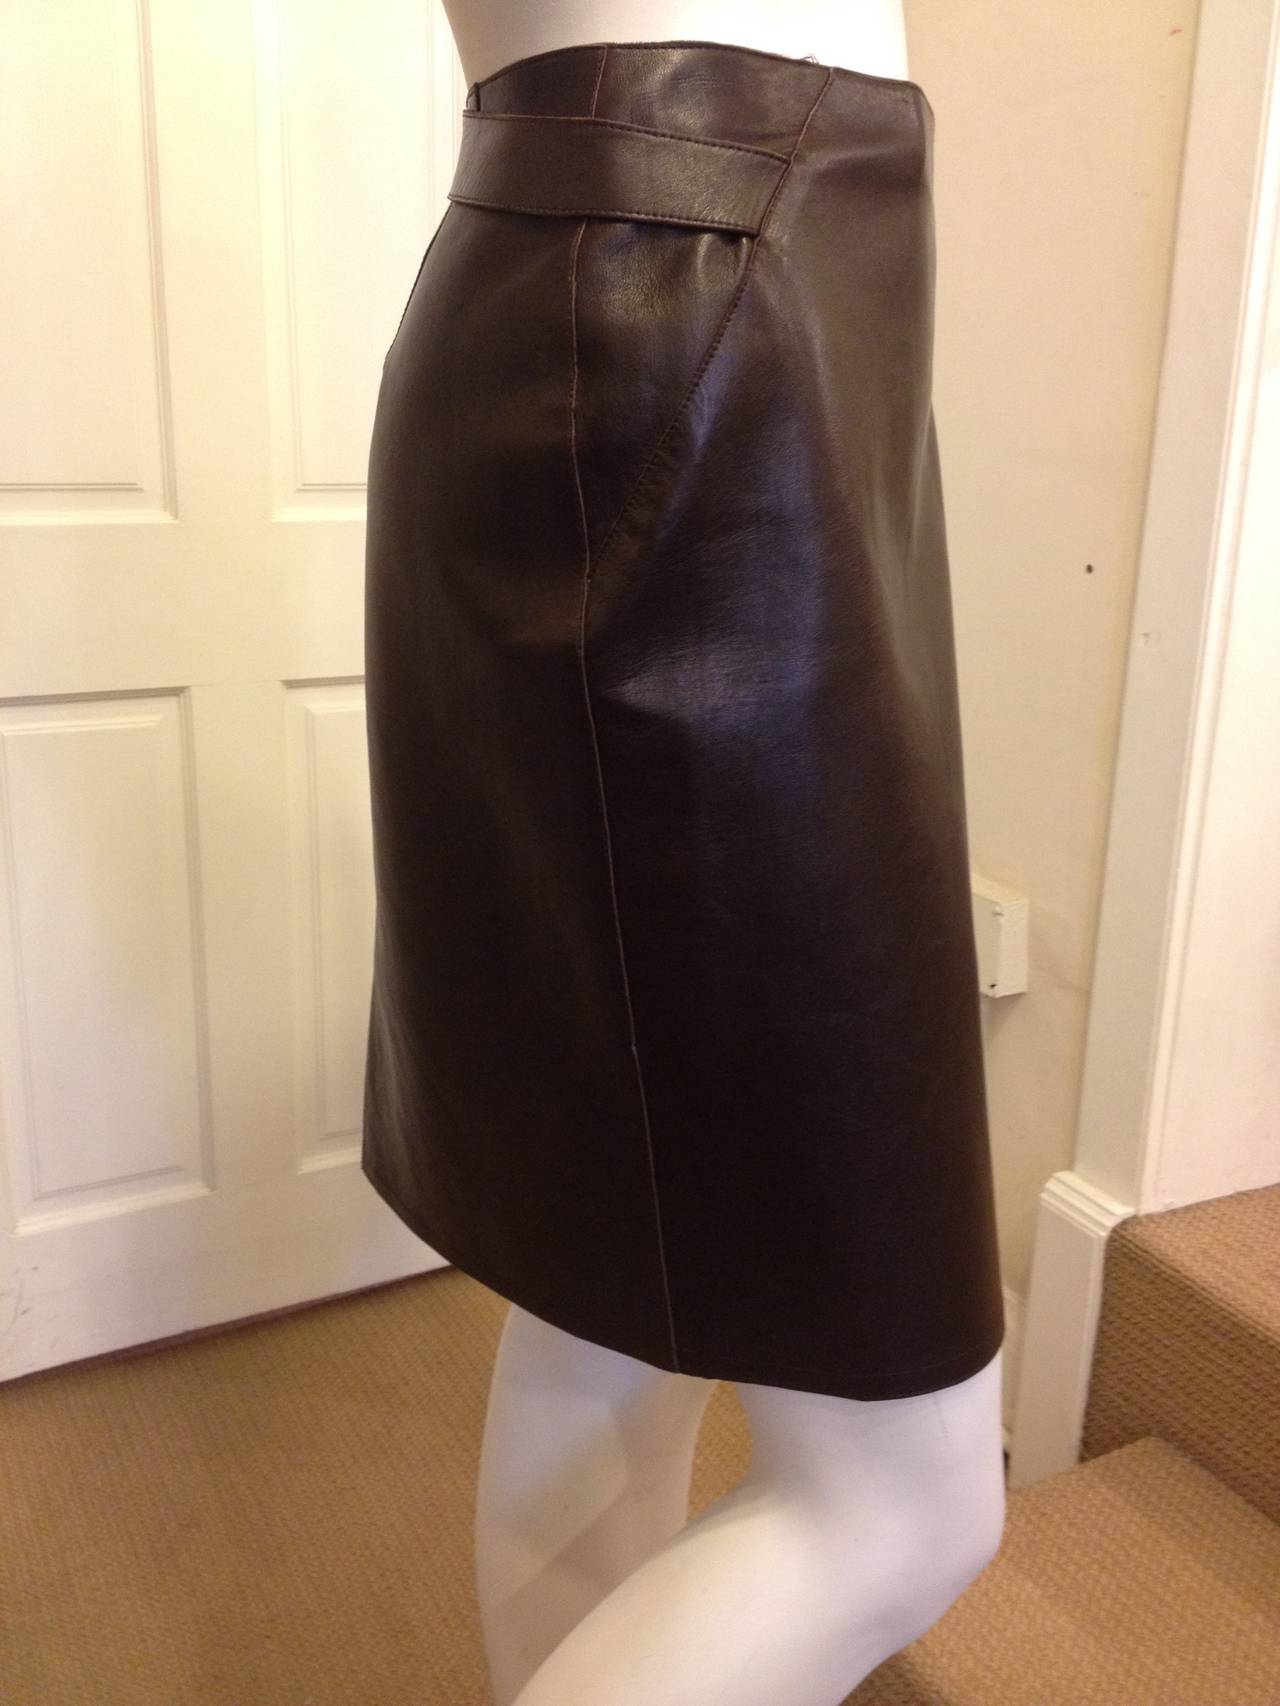 Soft, supple leather makes this Chanel skirt one of our favorites for this season.  The chocolate brown leather straps meet in the back and button with a single pewter button.  The front has a hidden clasp to ensure proper closure.  Perfect for